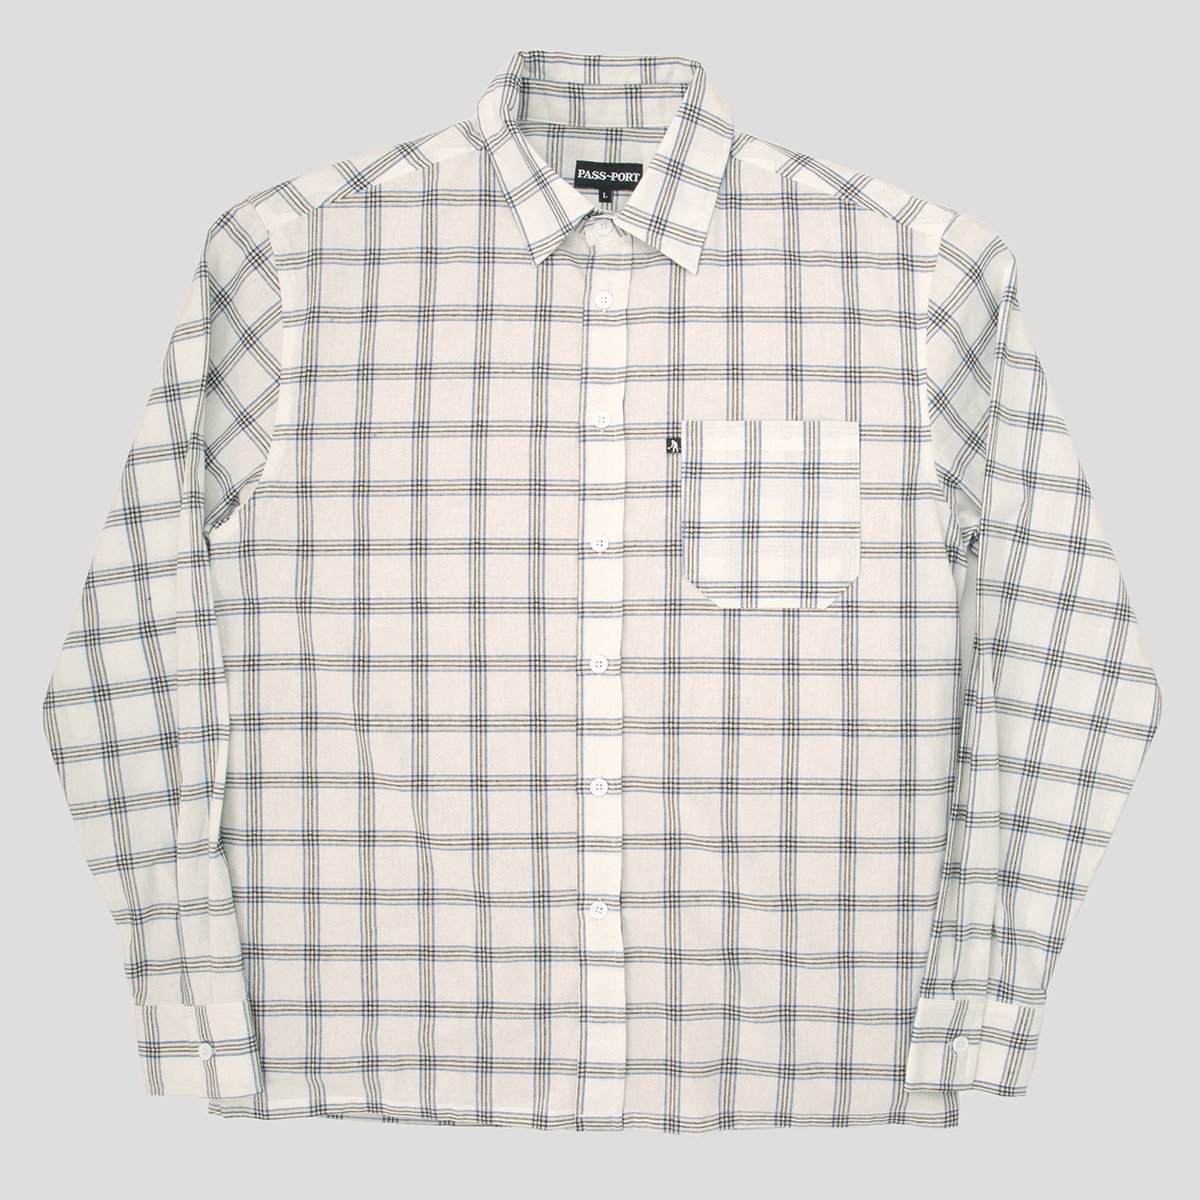 PASS~PORT "WORKERS CHECK" L/S SHIRT WHITE